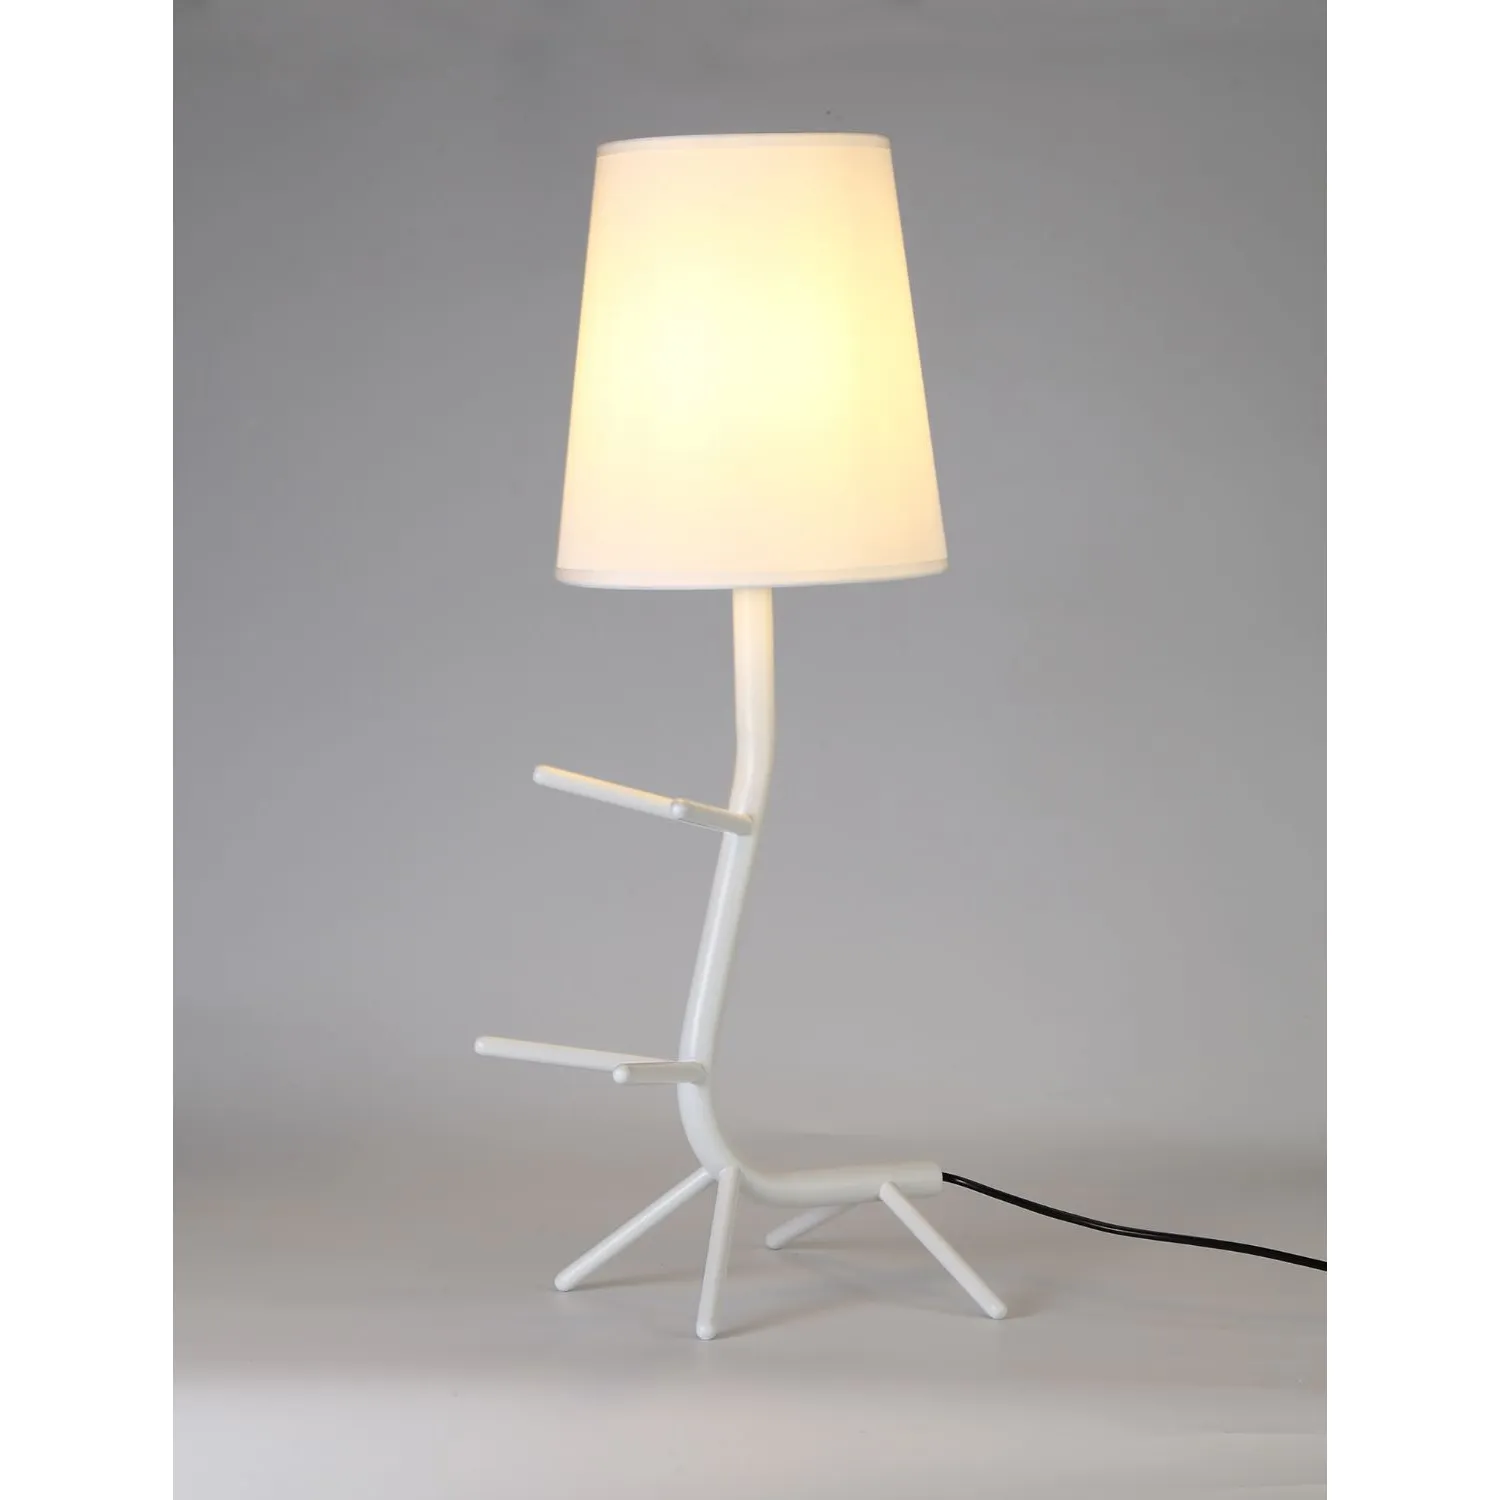 Centipede Table Lamp With Shade, 1 x E27, White